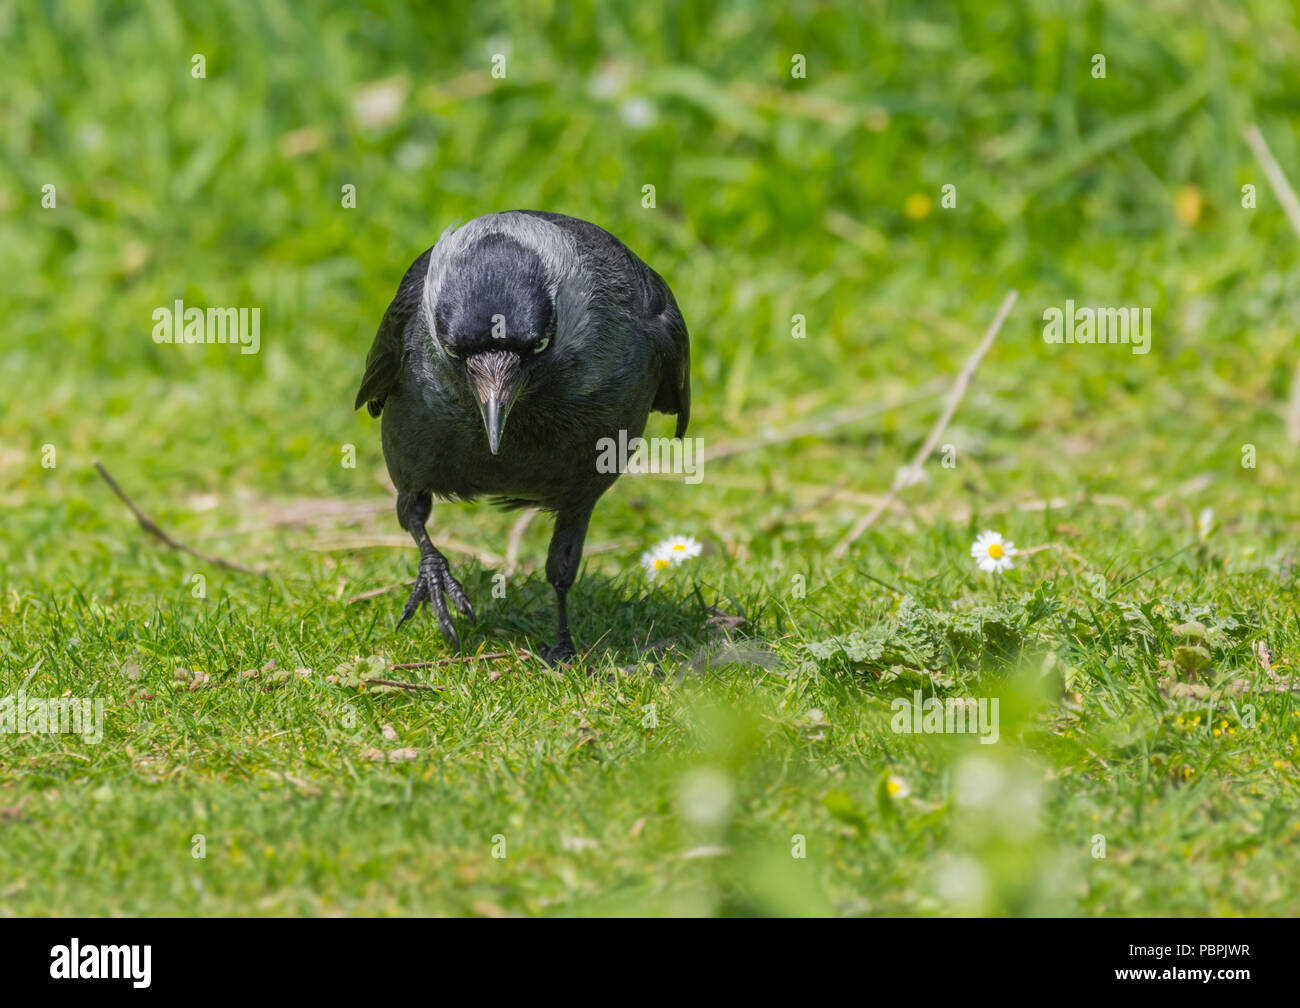 Eurasian Jackdaw (Corvus monedula) standing on grass looking at the camera in West Sussex, England, UK. Bird looking angry. Stock Photo